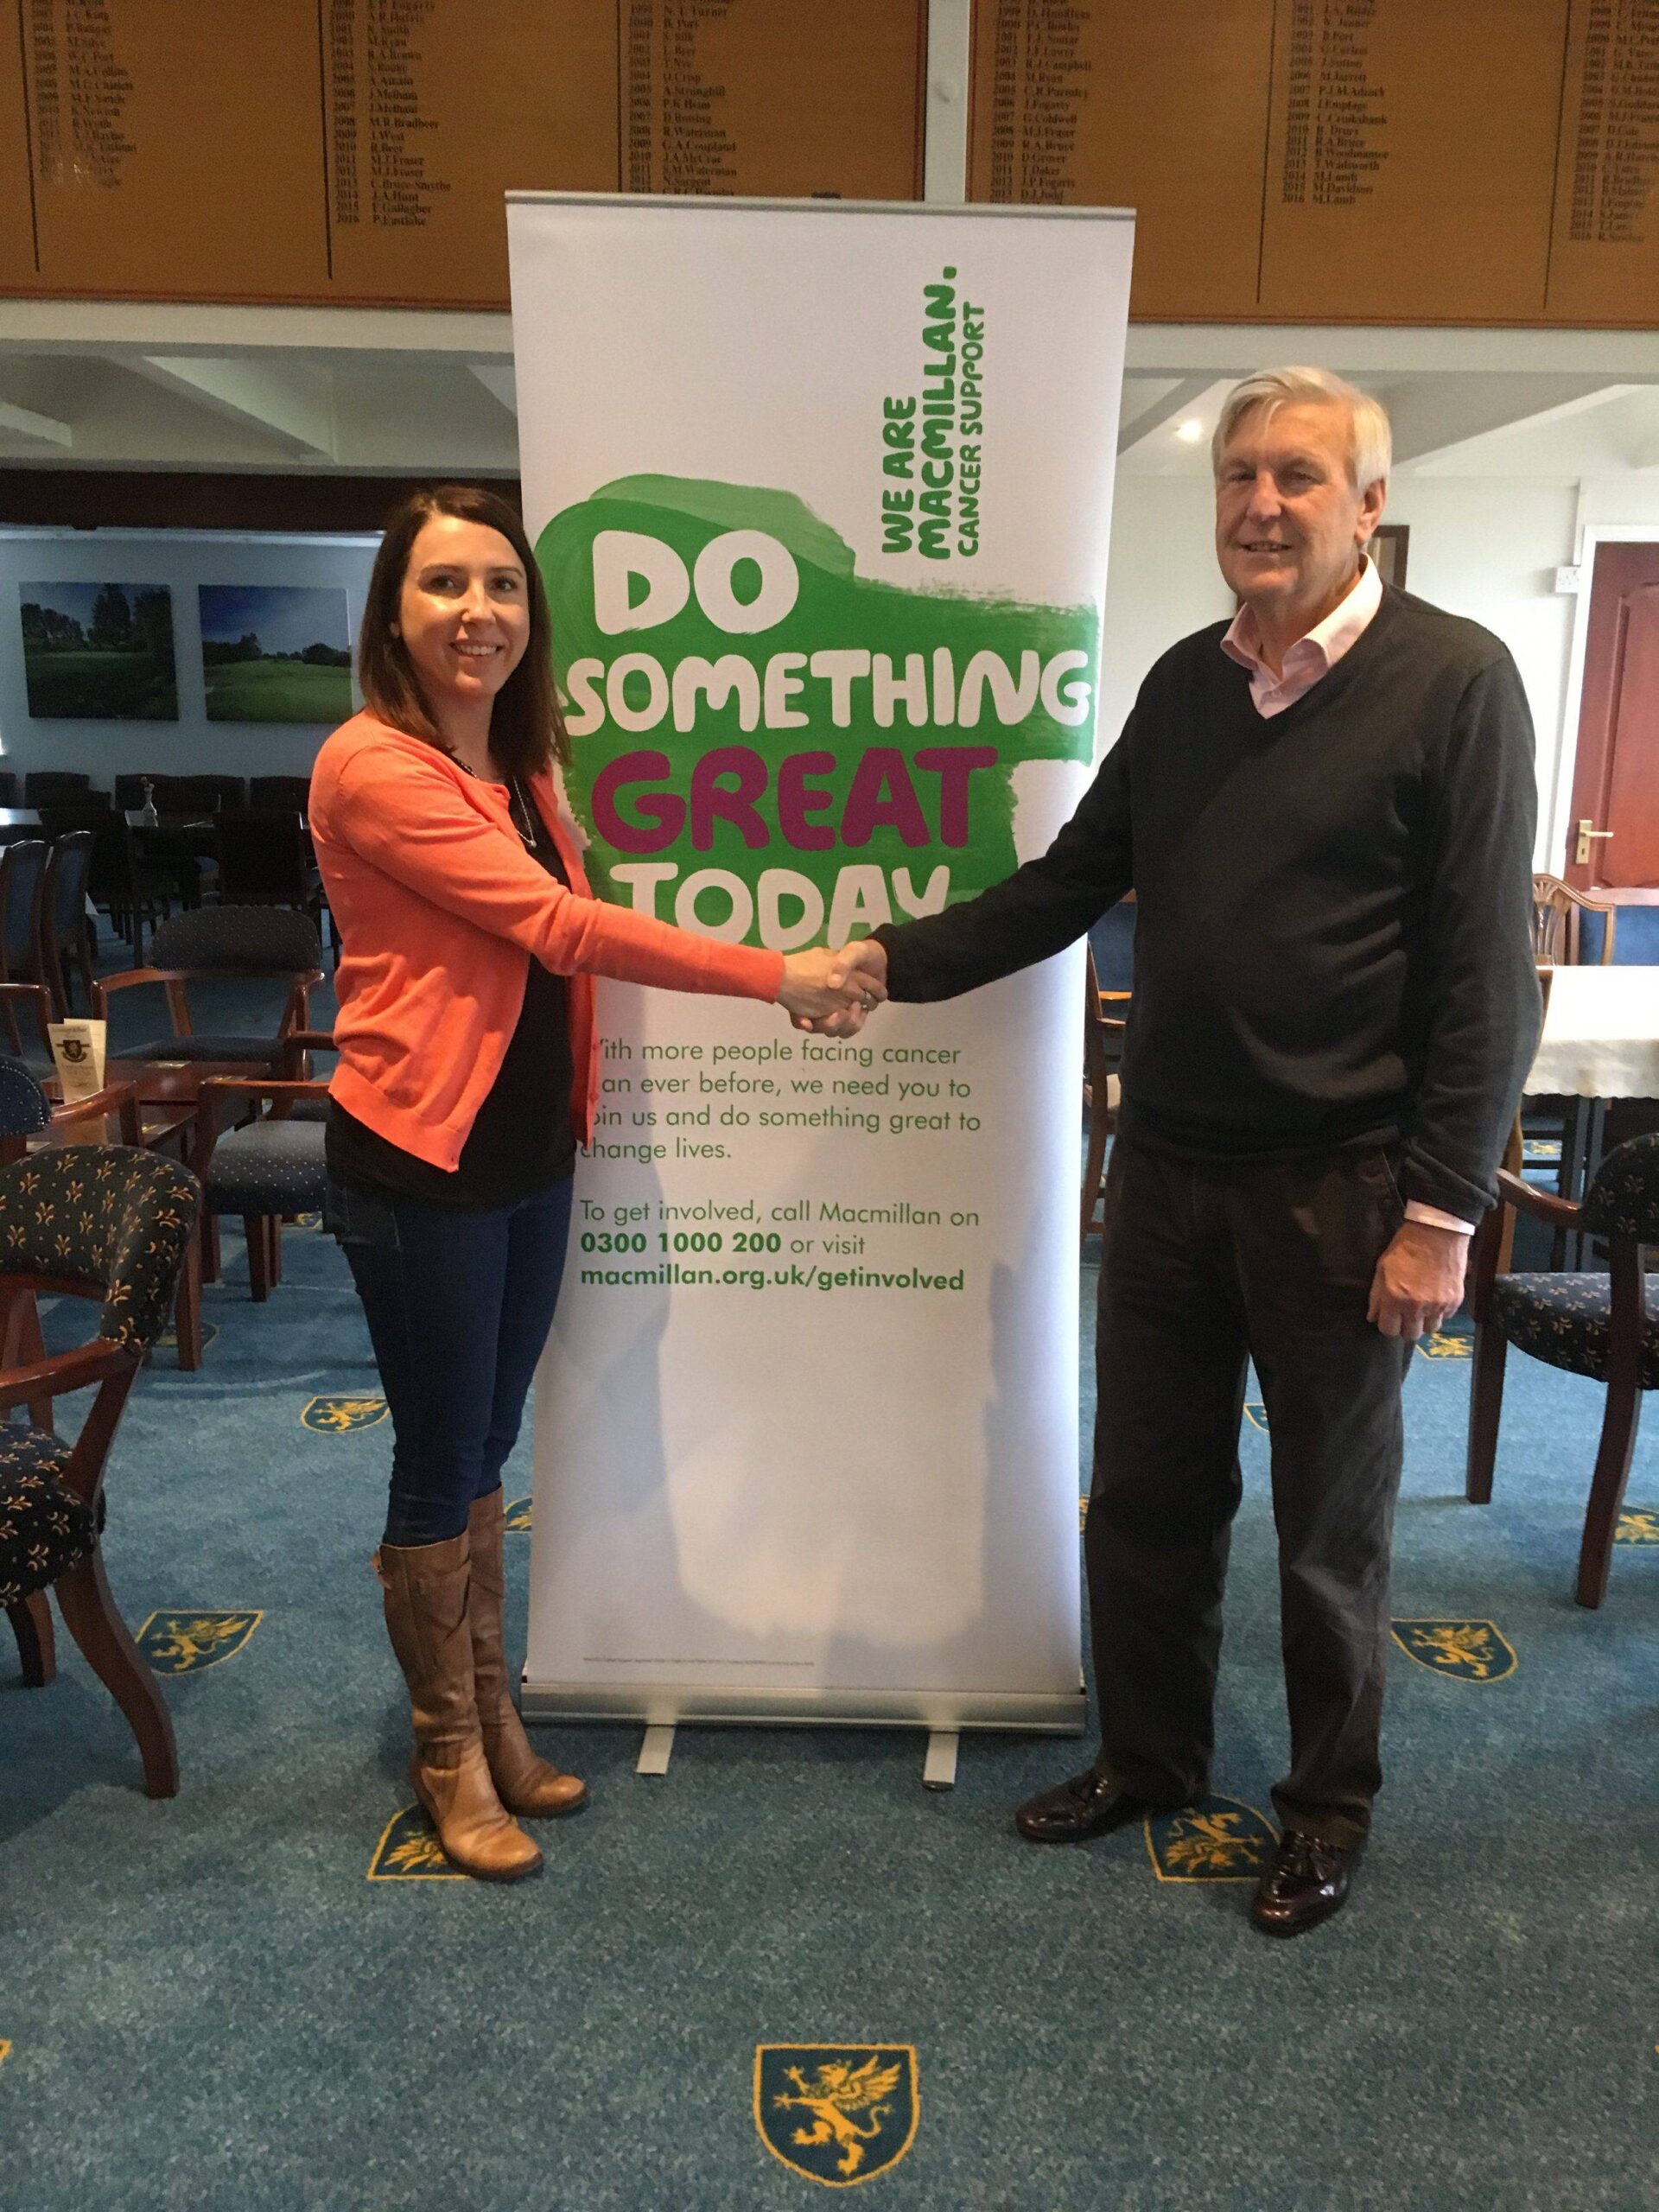 Lamberhurst golfers club together to help Macmillan Cancer Support